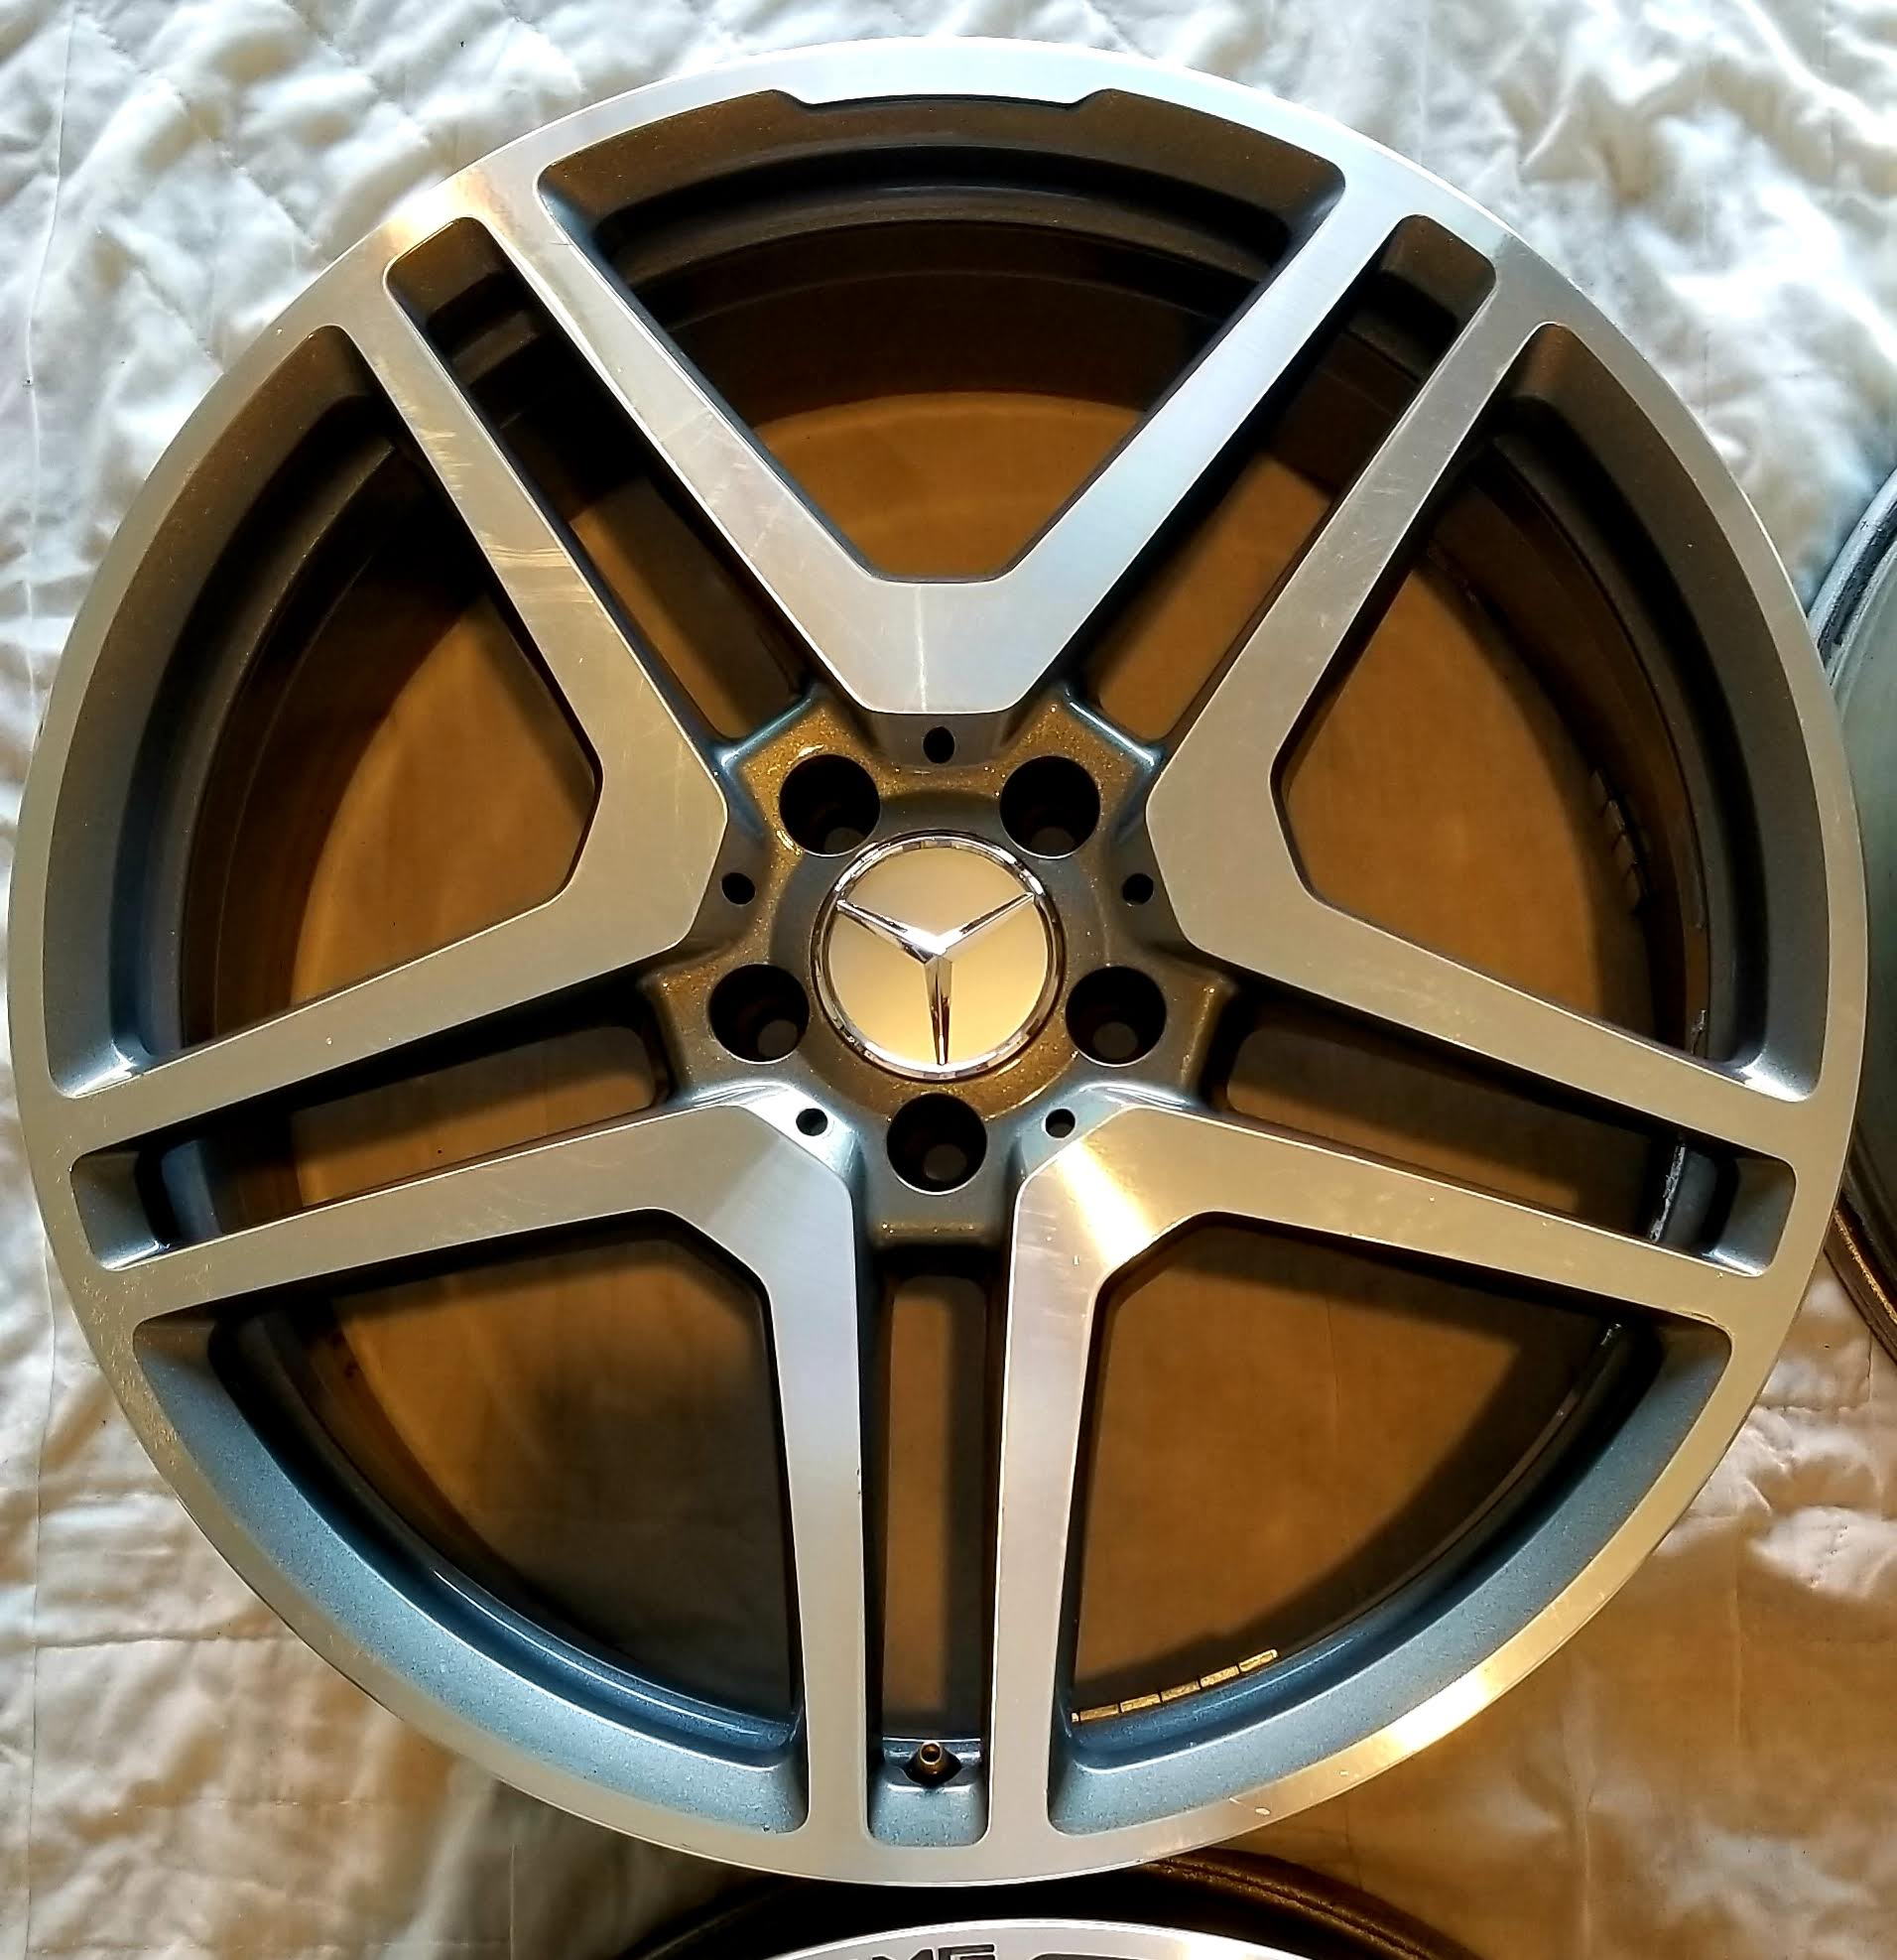 Wheels and Tires/Axles - (4)OEM MERCEDES AMG CL63 CL65 S63 S65 FORGED 20' Wheels A2214013102 A2214013202 - Used - Dallas, TX 75040, United States